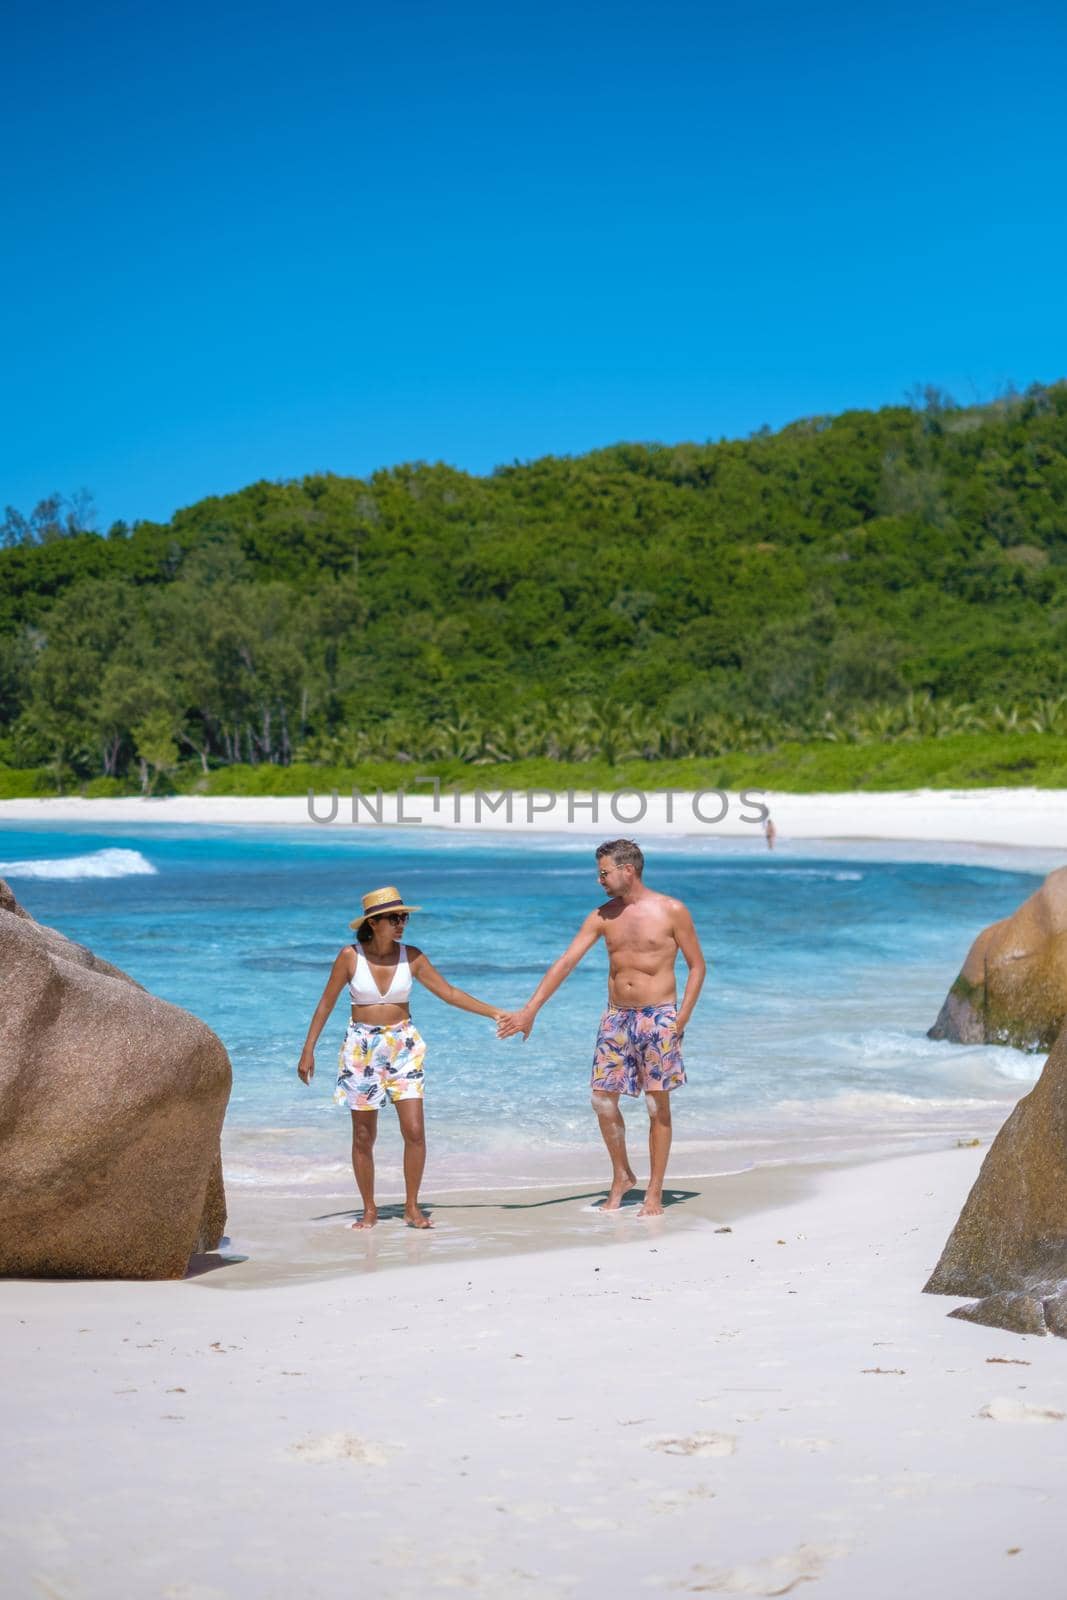 Anse Cocos La Digue Seychelles, a young couple of men and women on a tropical beach during a luxury vacation in Seychelles. Tropical beach Anse Cocos La Digue Seychelles.